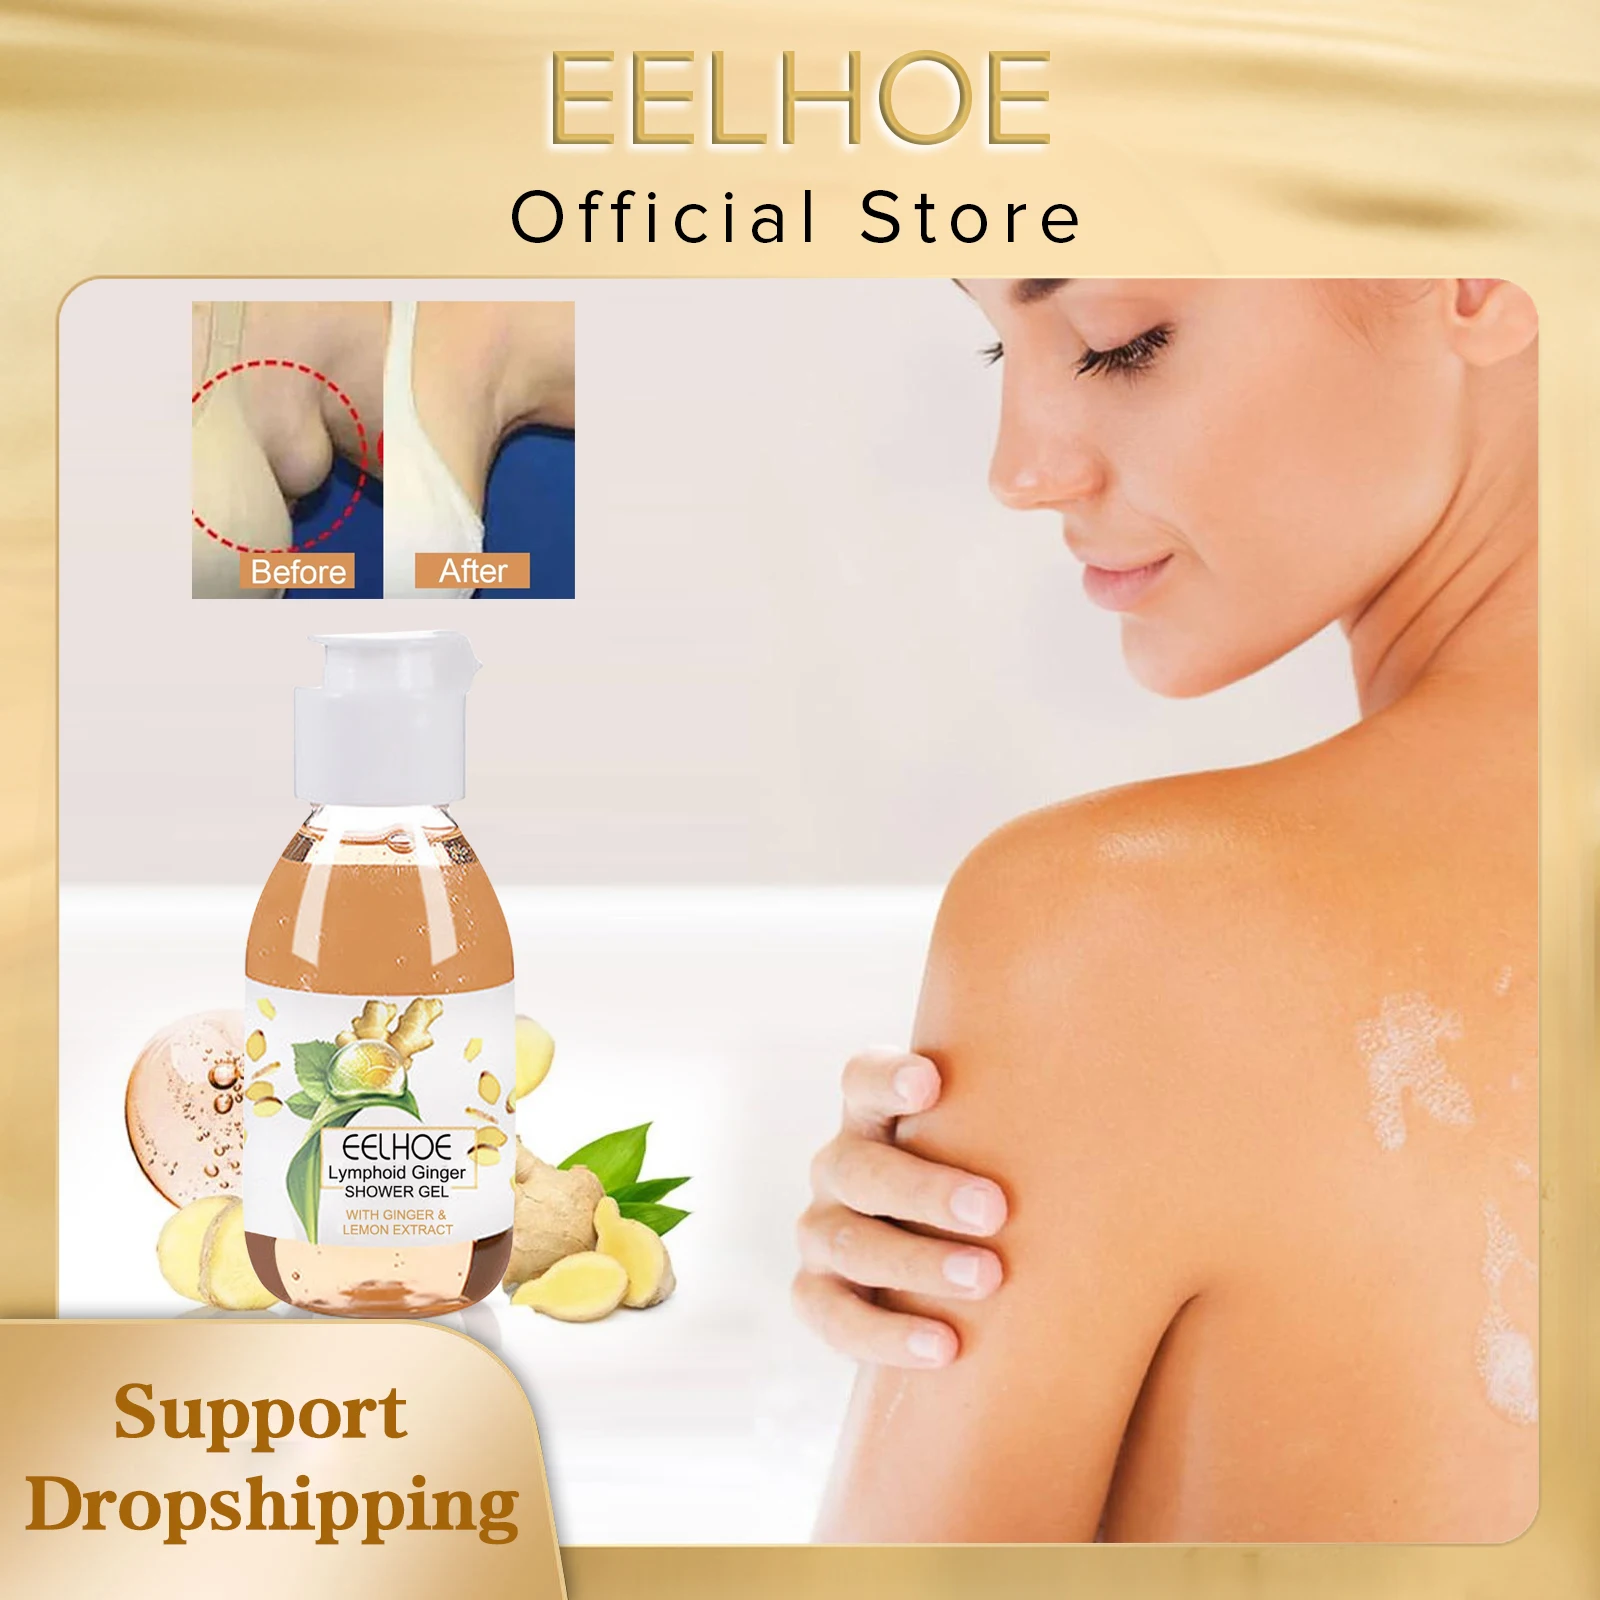 

EELHOE Lymphatic Drainage Ginger Shower Gel Neck Lymph Relief Detox Slimming Body Cleaning Swelling Fat Loss Firm Skin Body Wash